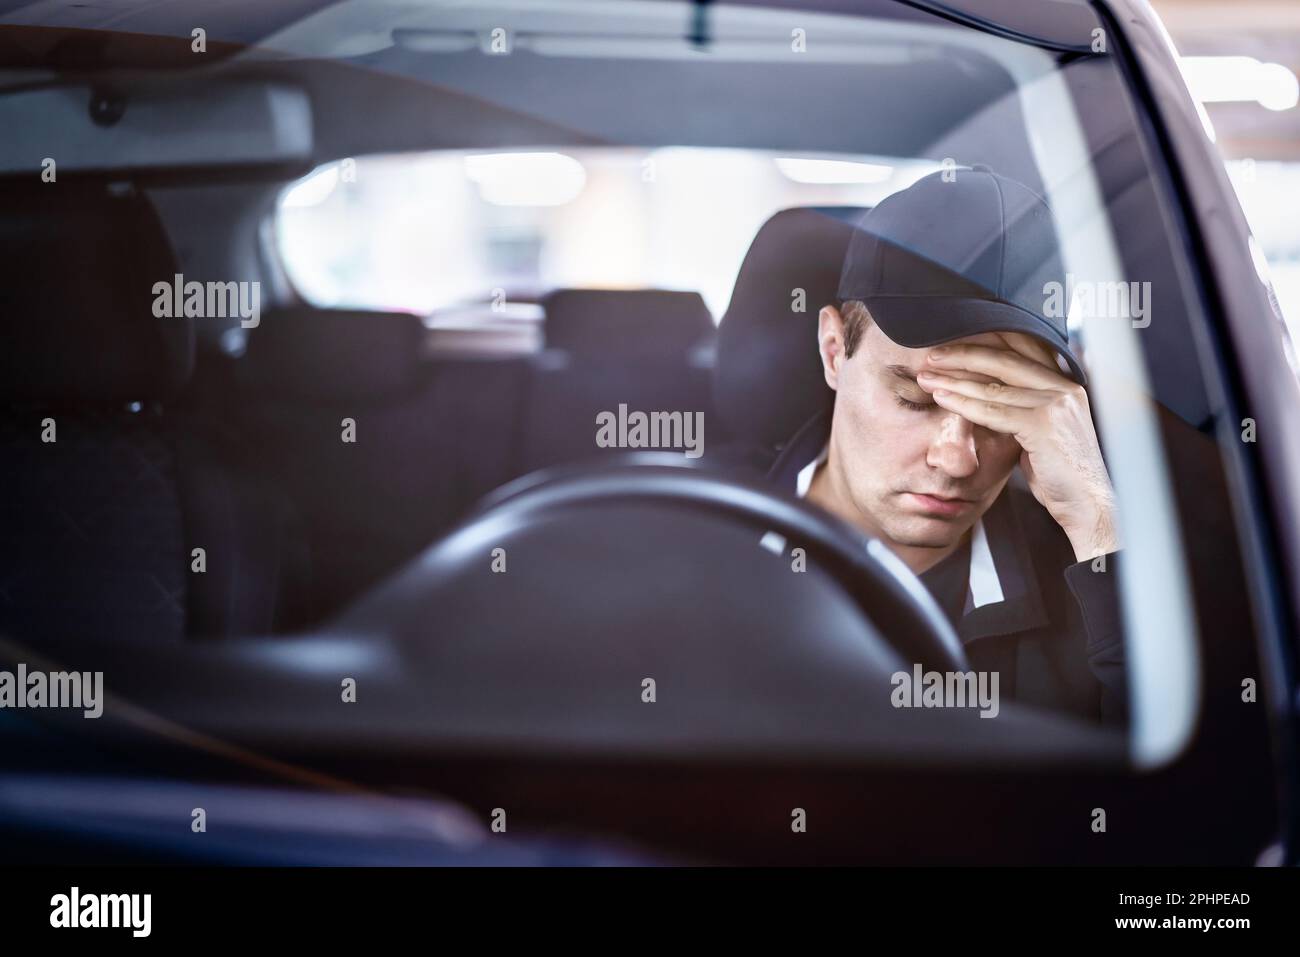 Sad man in car. Accident in traffic. Tired sleepy driver. Sick with headache or migraine. Anxiety, stress, despair or depression. Stock Photo